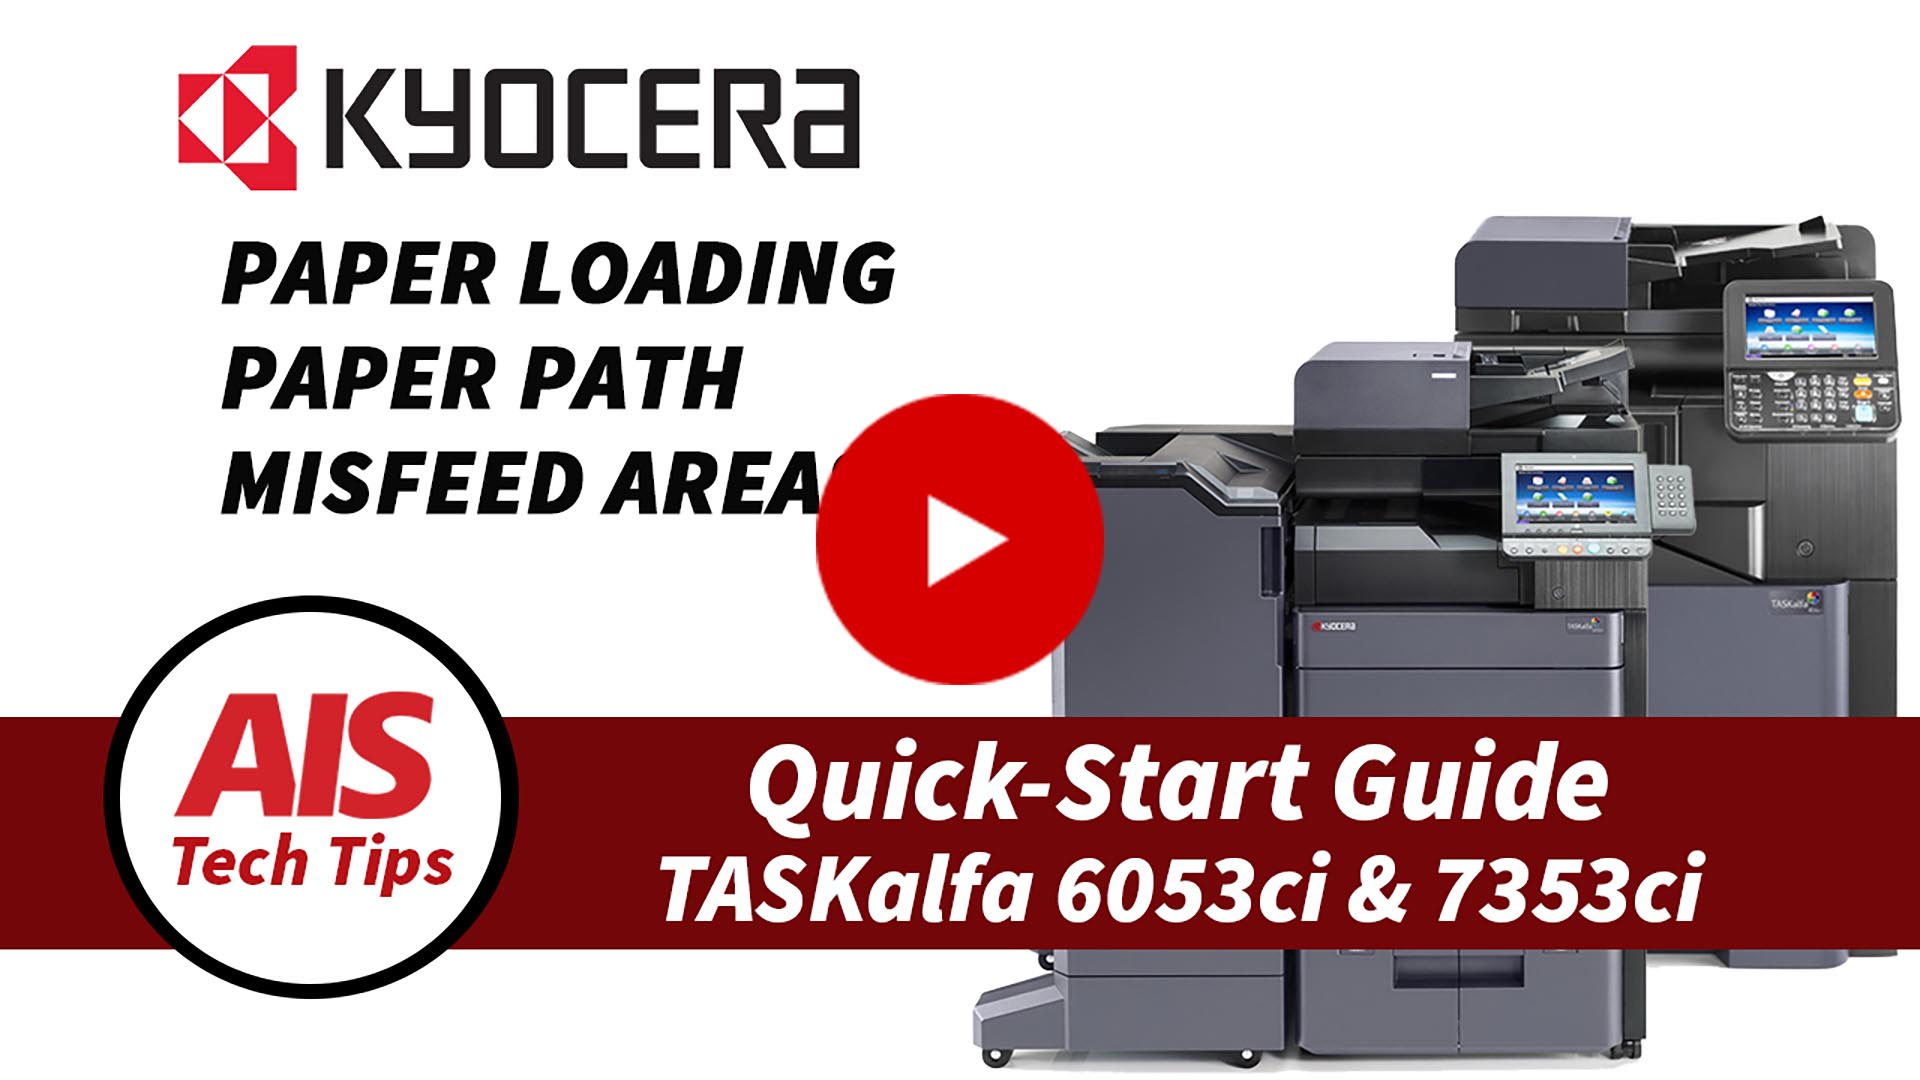 Kyocera Quick-Start Guide - Paper Loading - Paper Path - Misfeed Areas